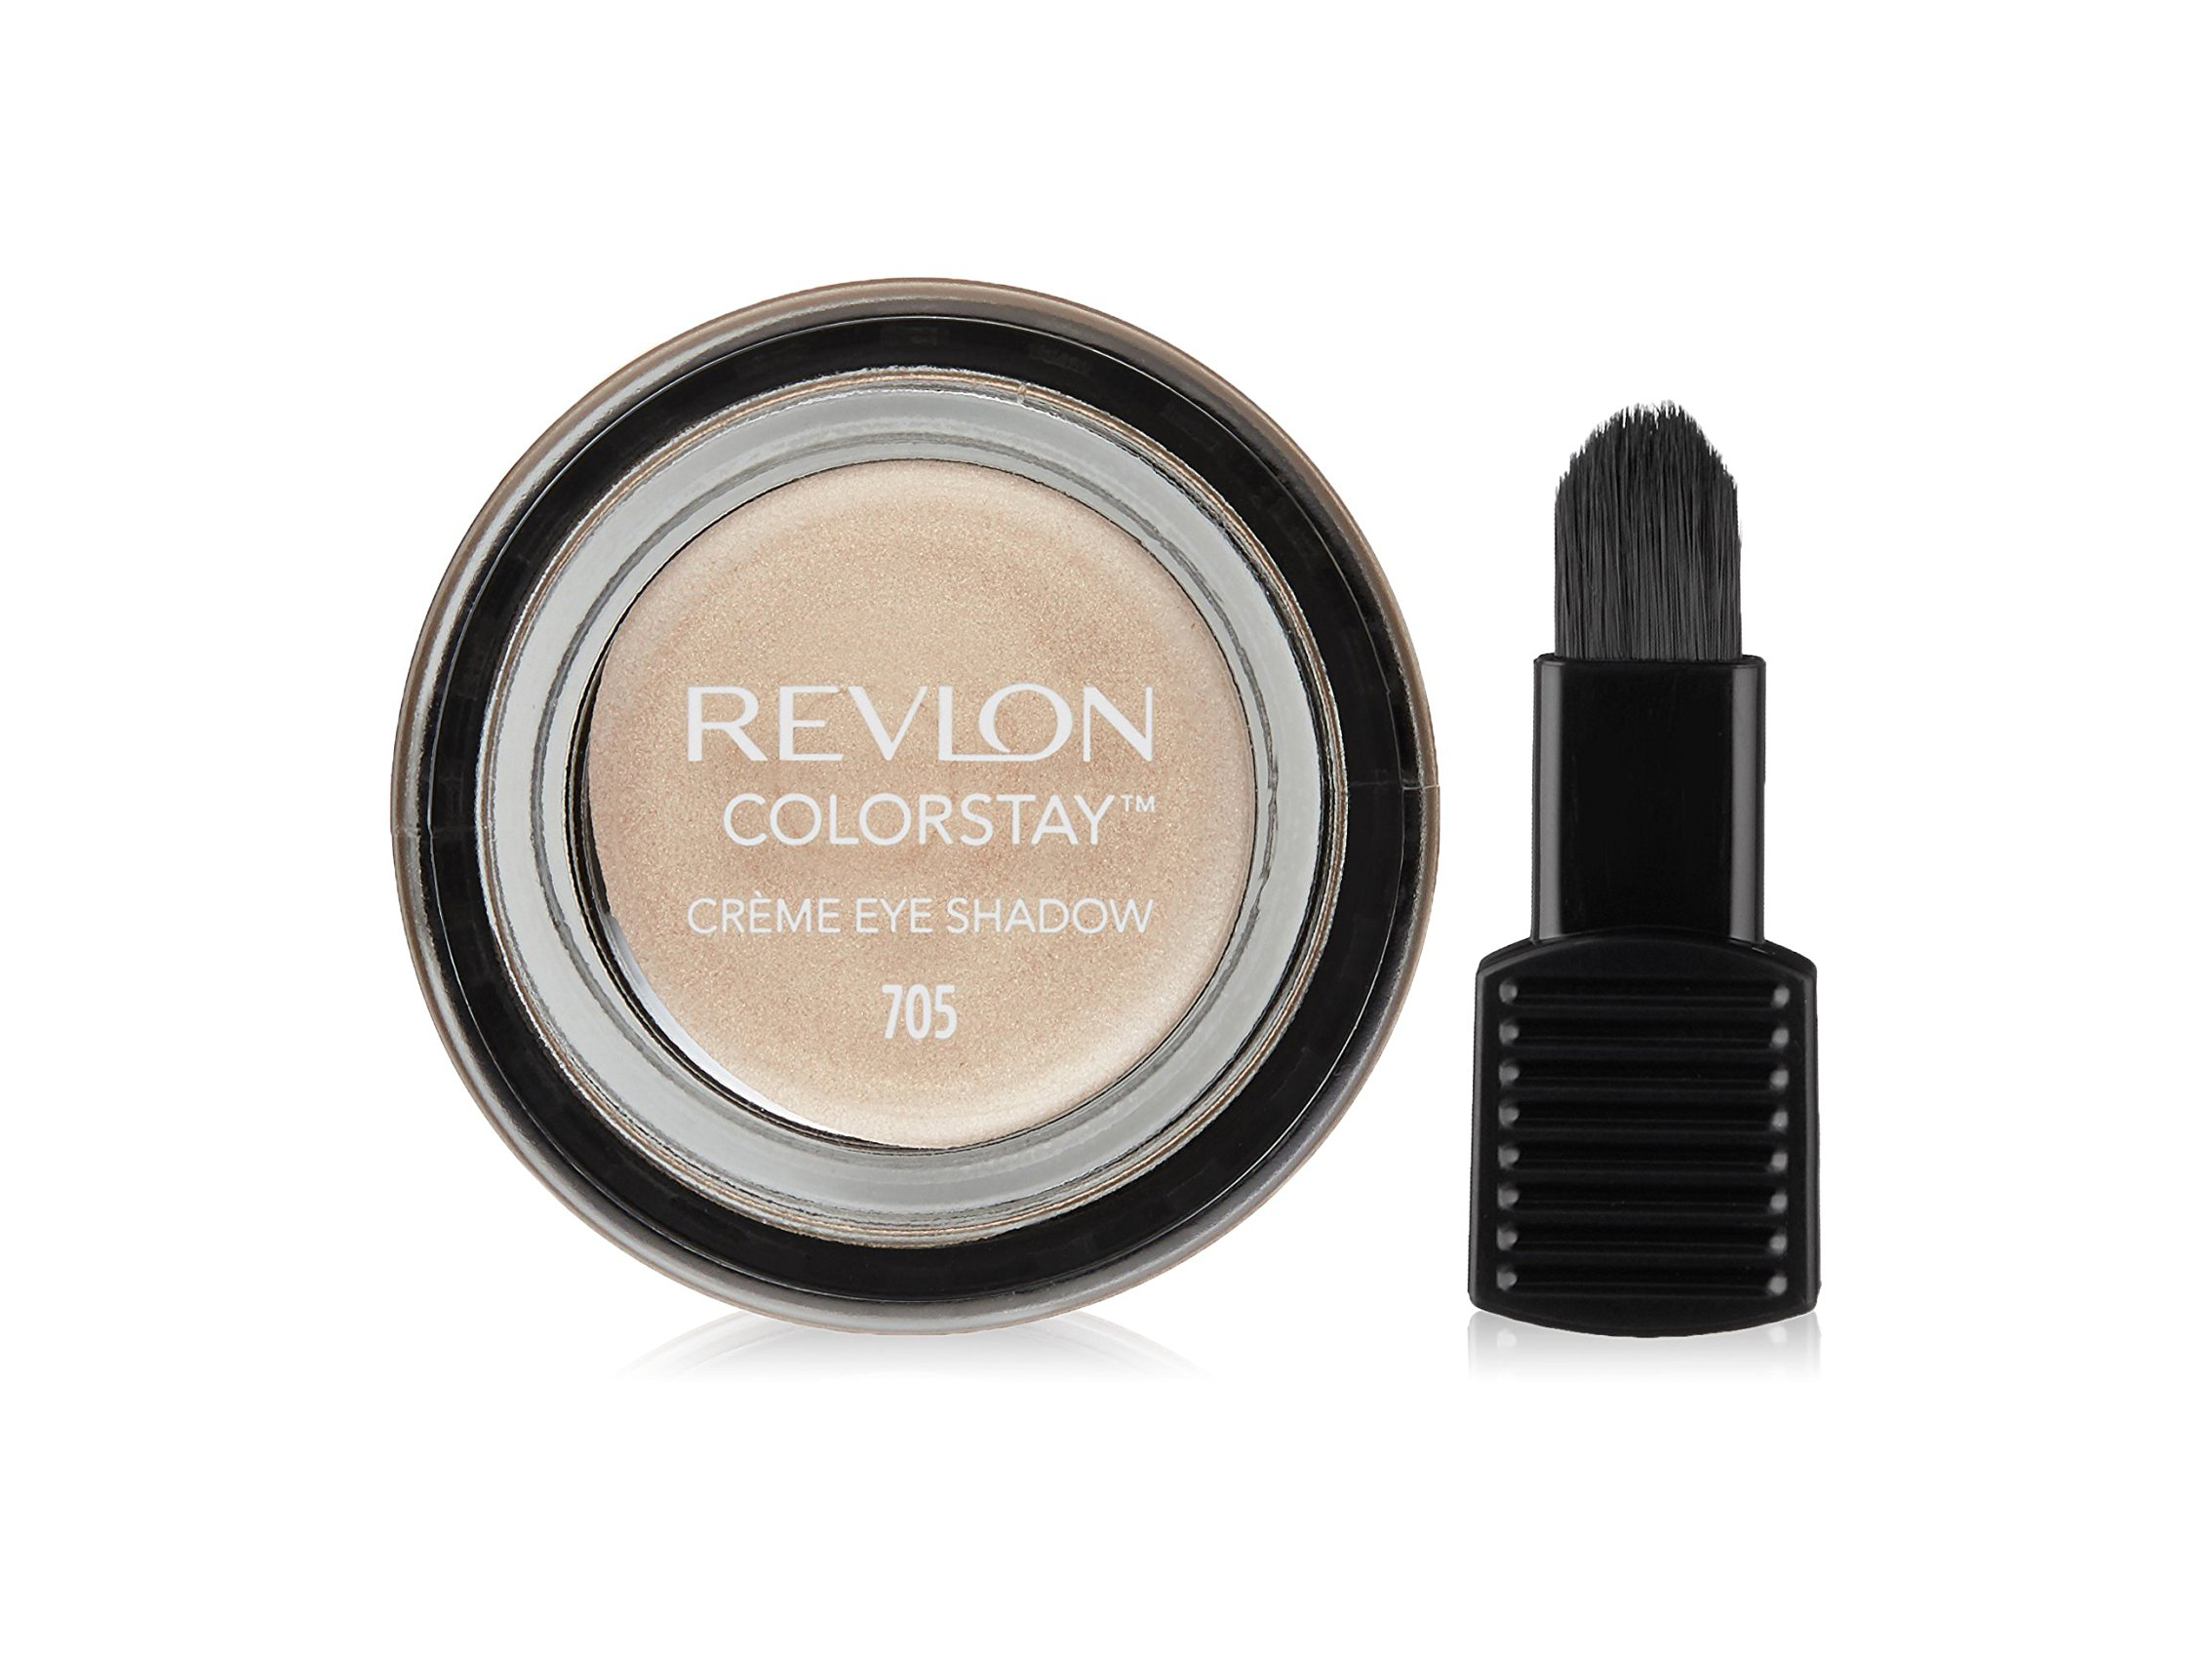 Image of Revlon Colorstay Creme Eye Shadow Ombretto Colore 705 Creme Brulee